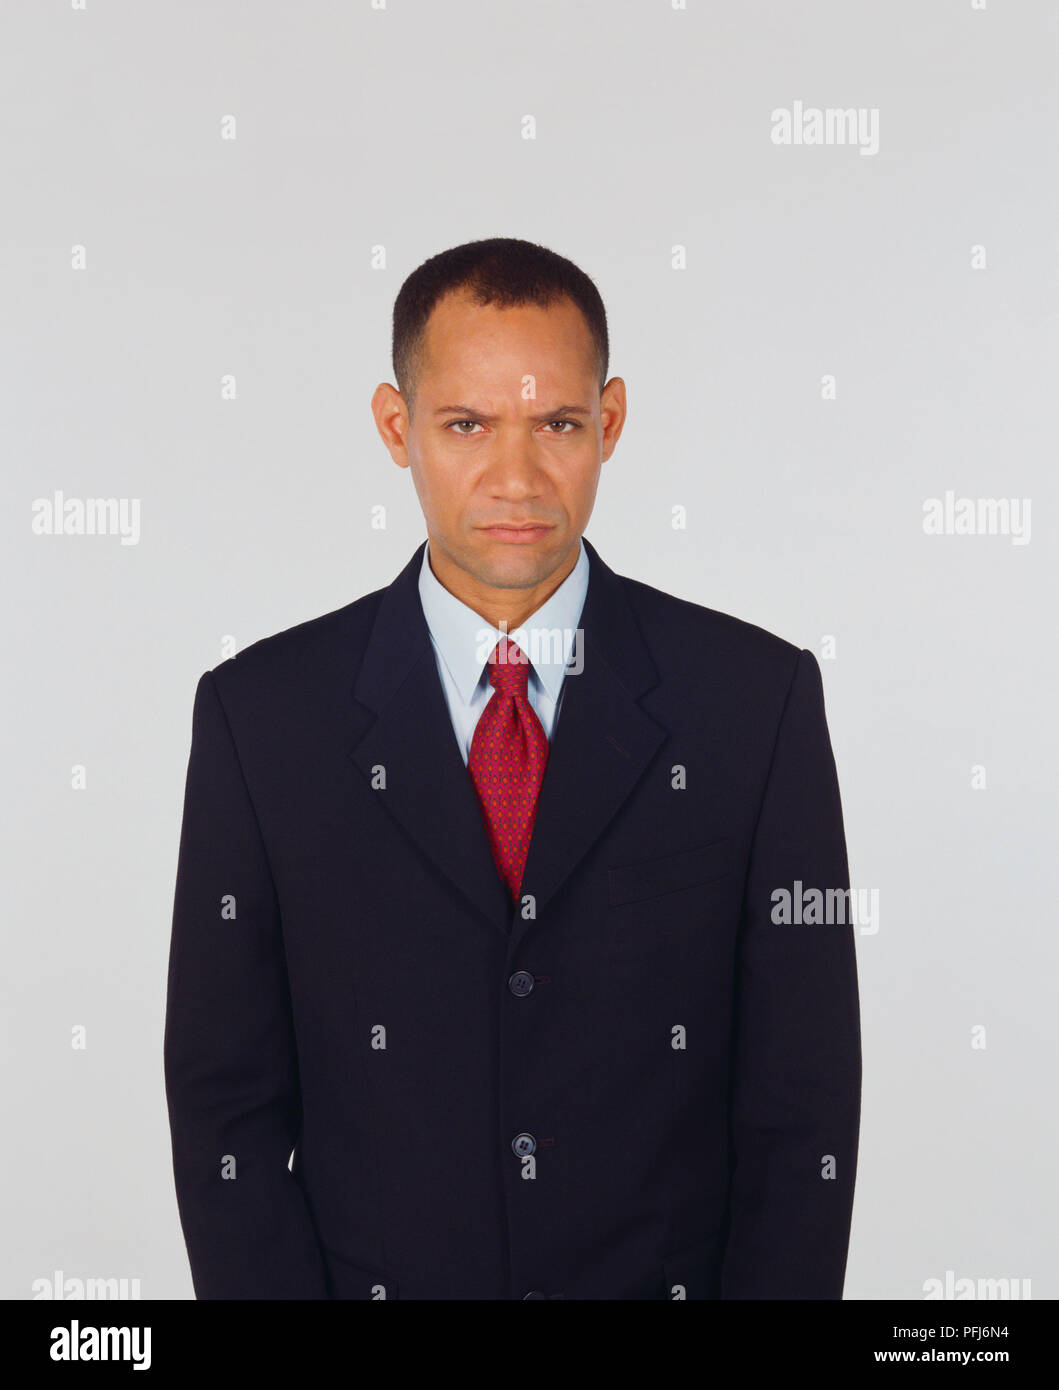 Standing man in business suit frowning, looking at camera, front view. Stock Photo